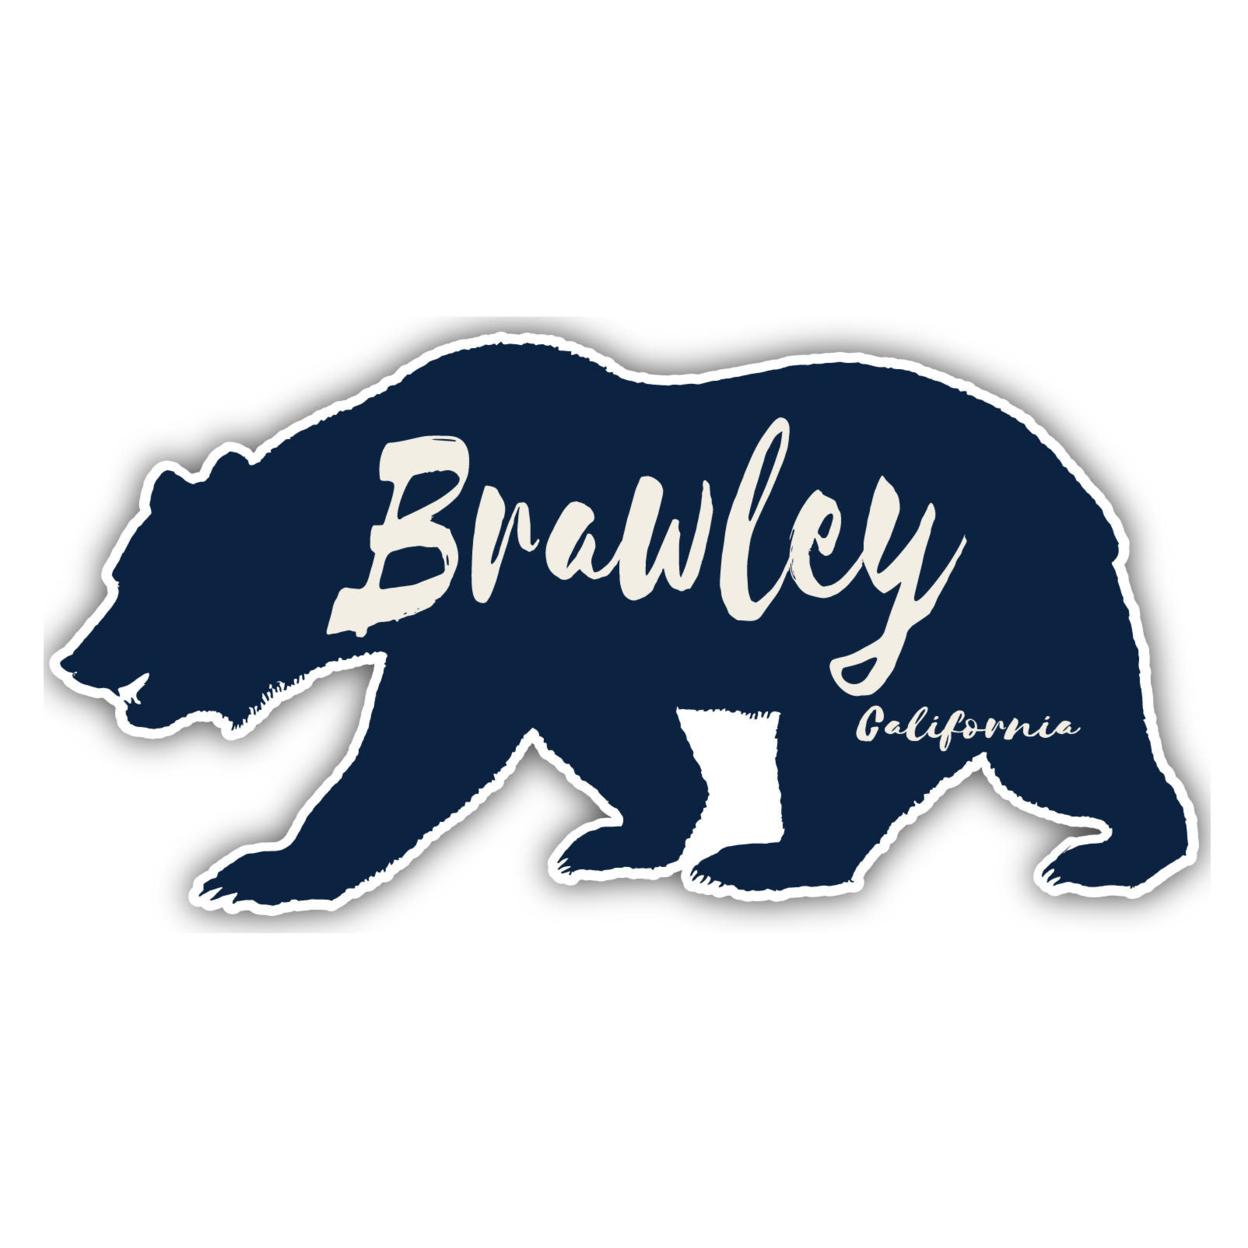 Brawley California Souvenir Decorative Stickers (Choose Theme And Size) - 4-Pack, 8-Inch, Bear